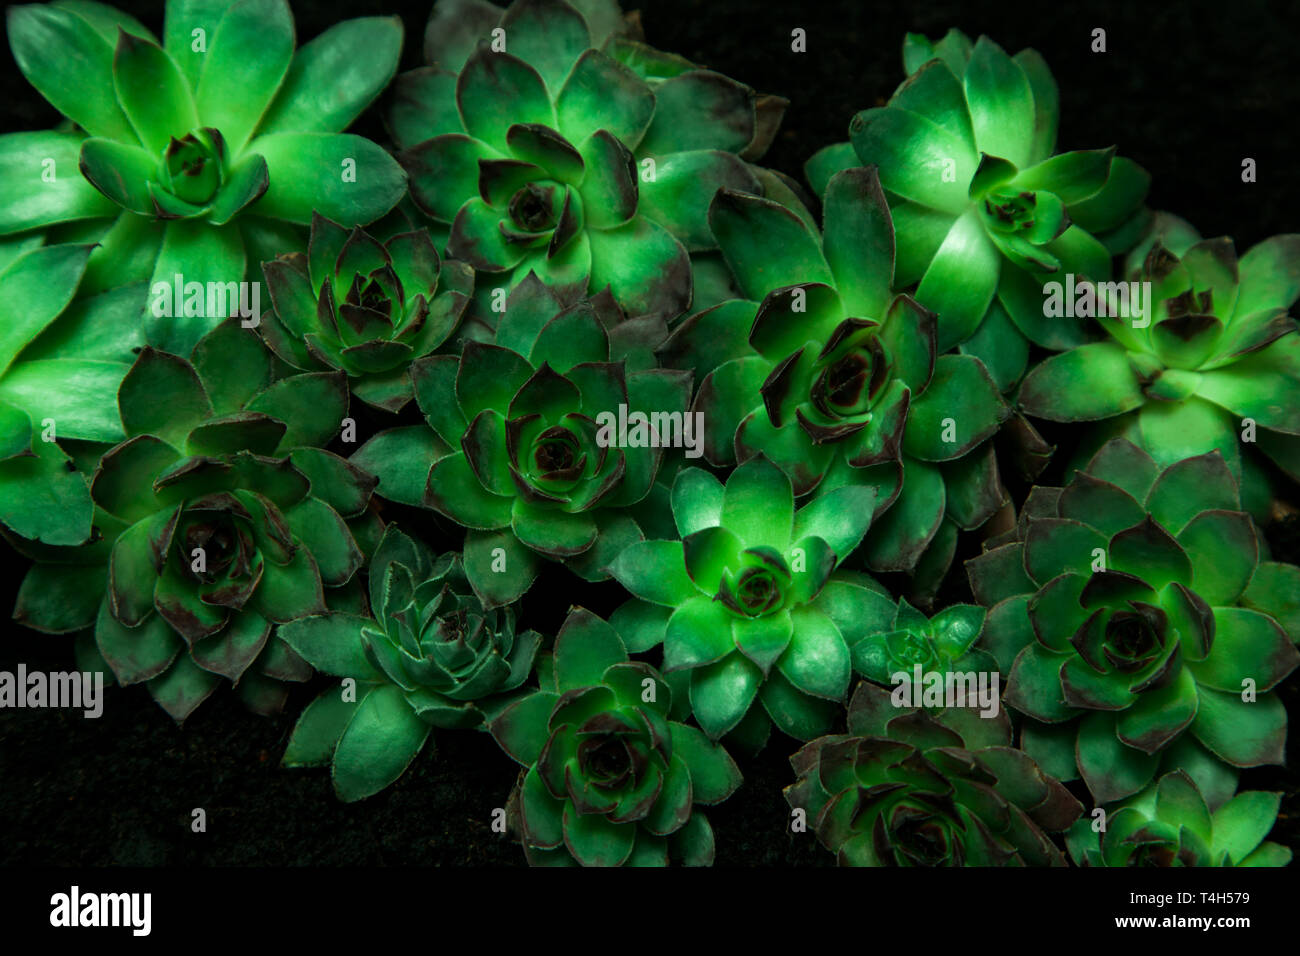 Group of different Aeoniums on the black background. Small flowers on ground of green, pink and yellow colors. Stock Photo